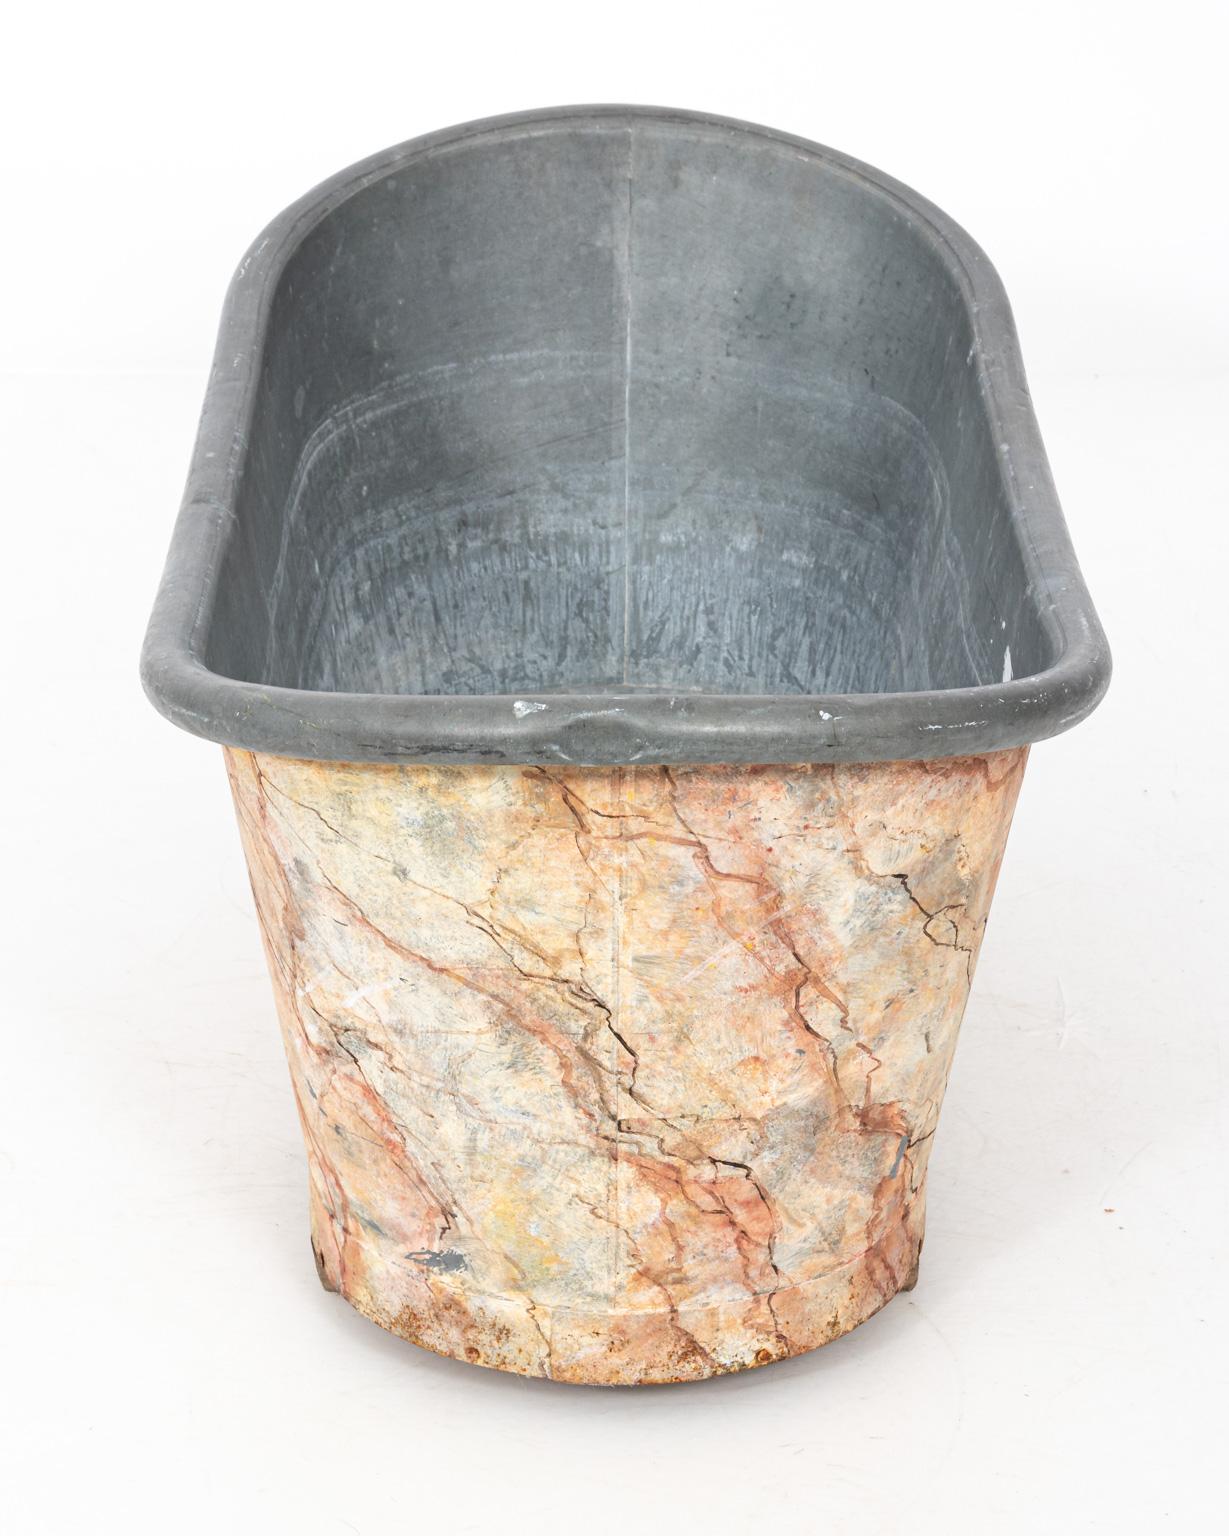 Painted faux marble zinc tub or large ice bucket, circa 20th century. Please note of wear consistent with age including water stains on the inside.